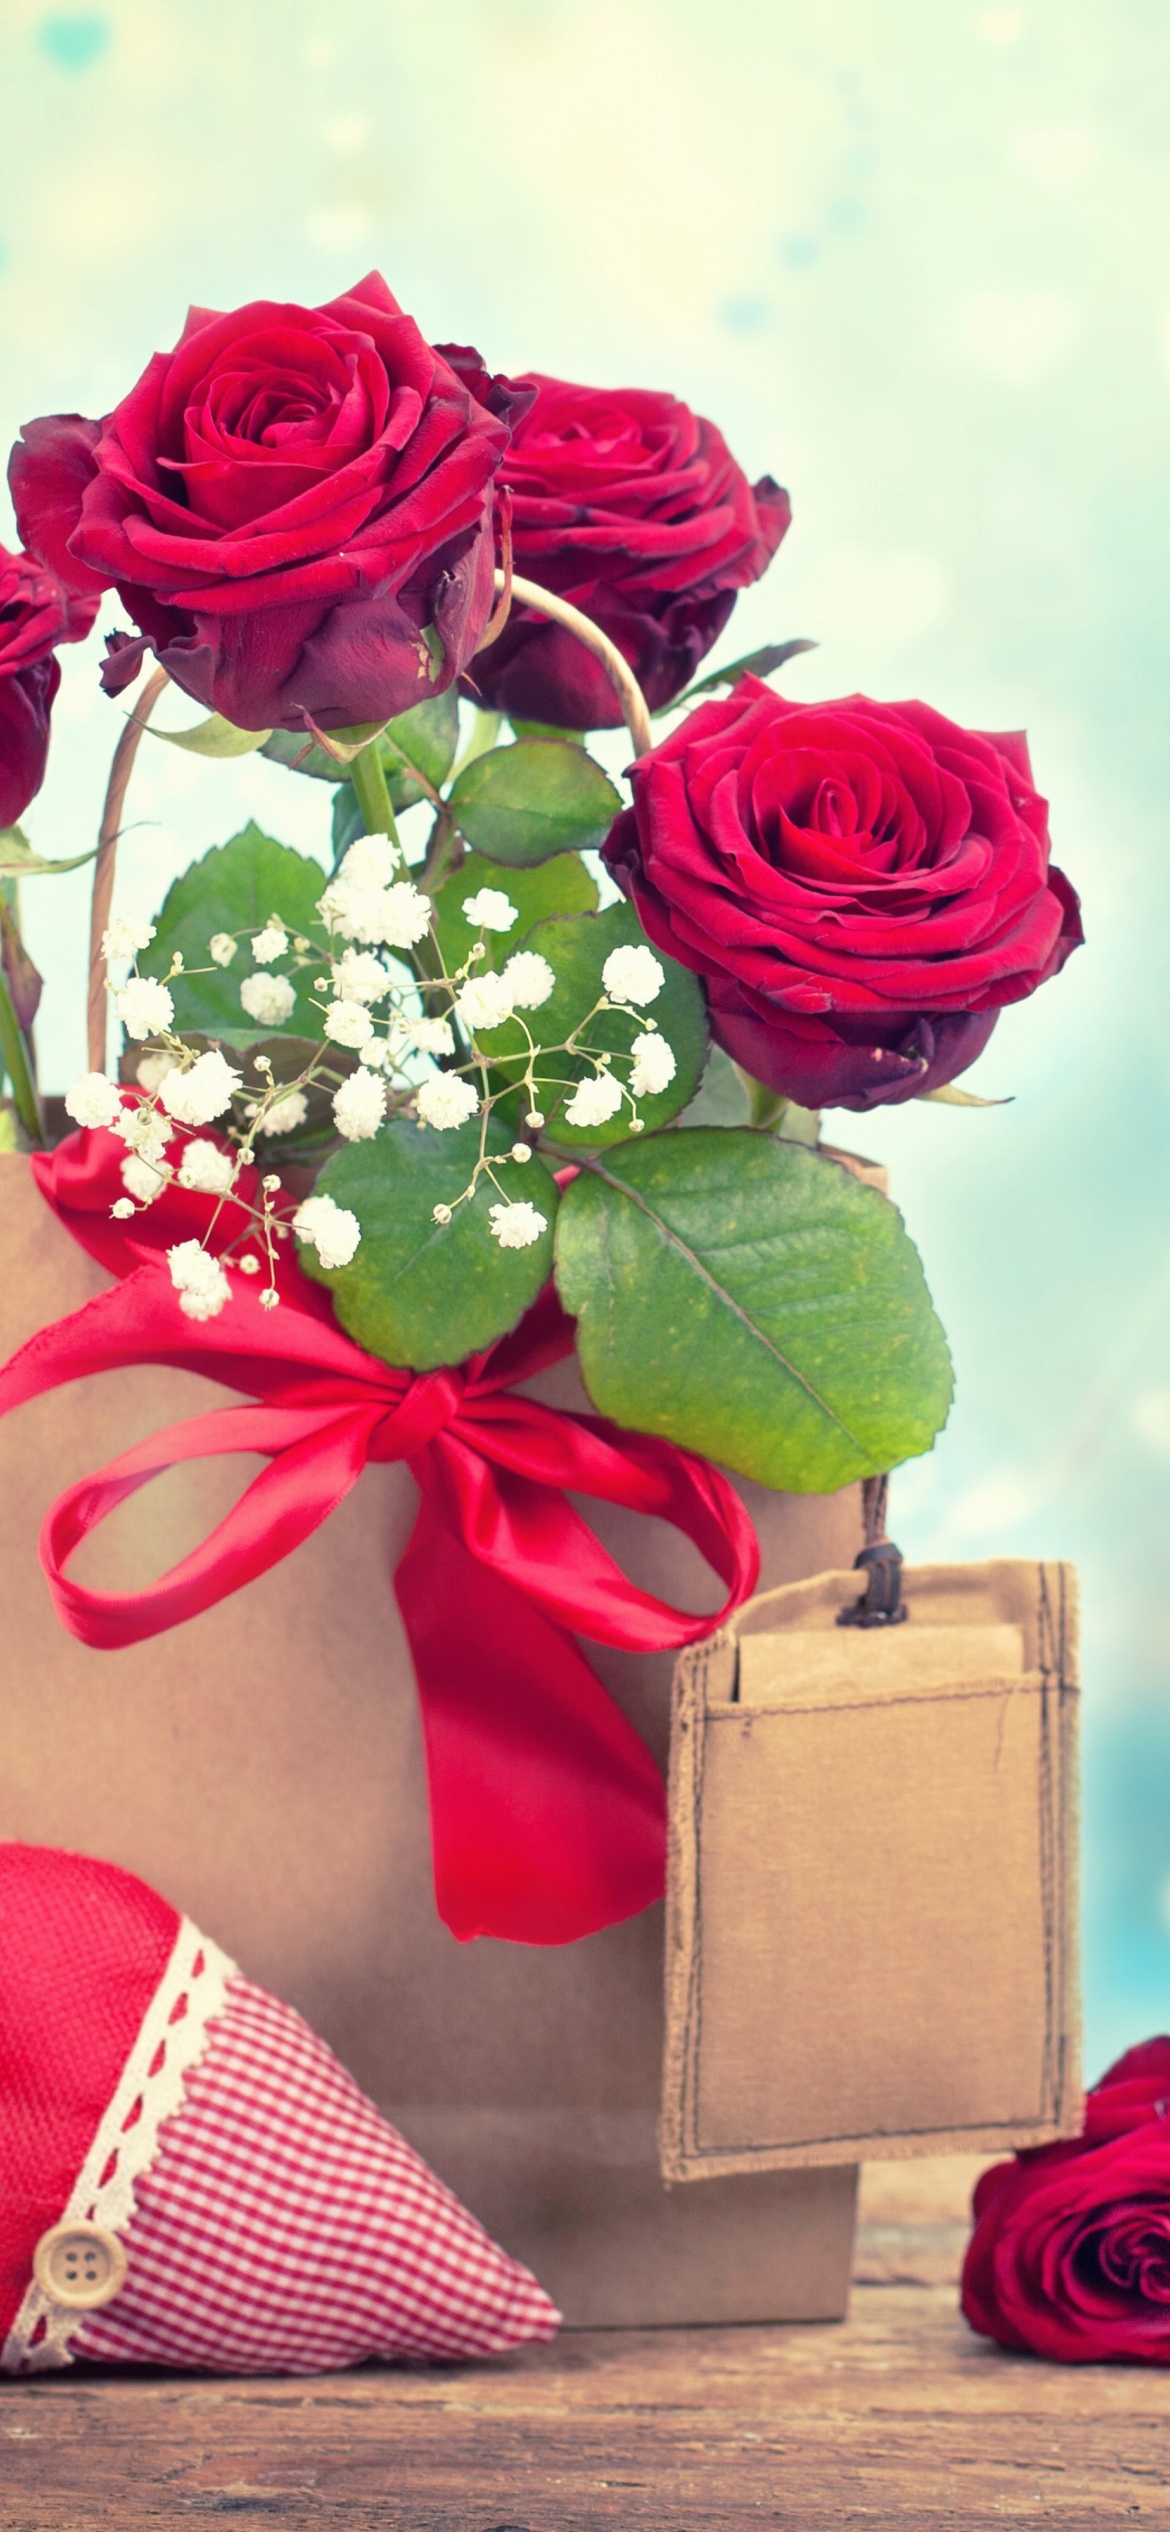 Send Valentines Day Roses wallpaper 1170x2532